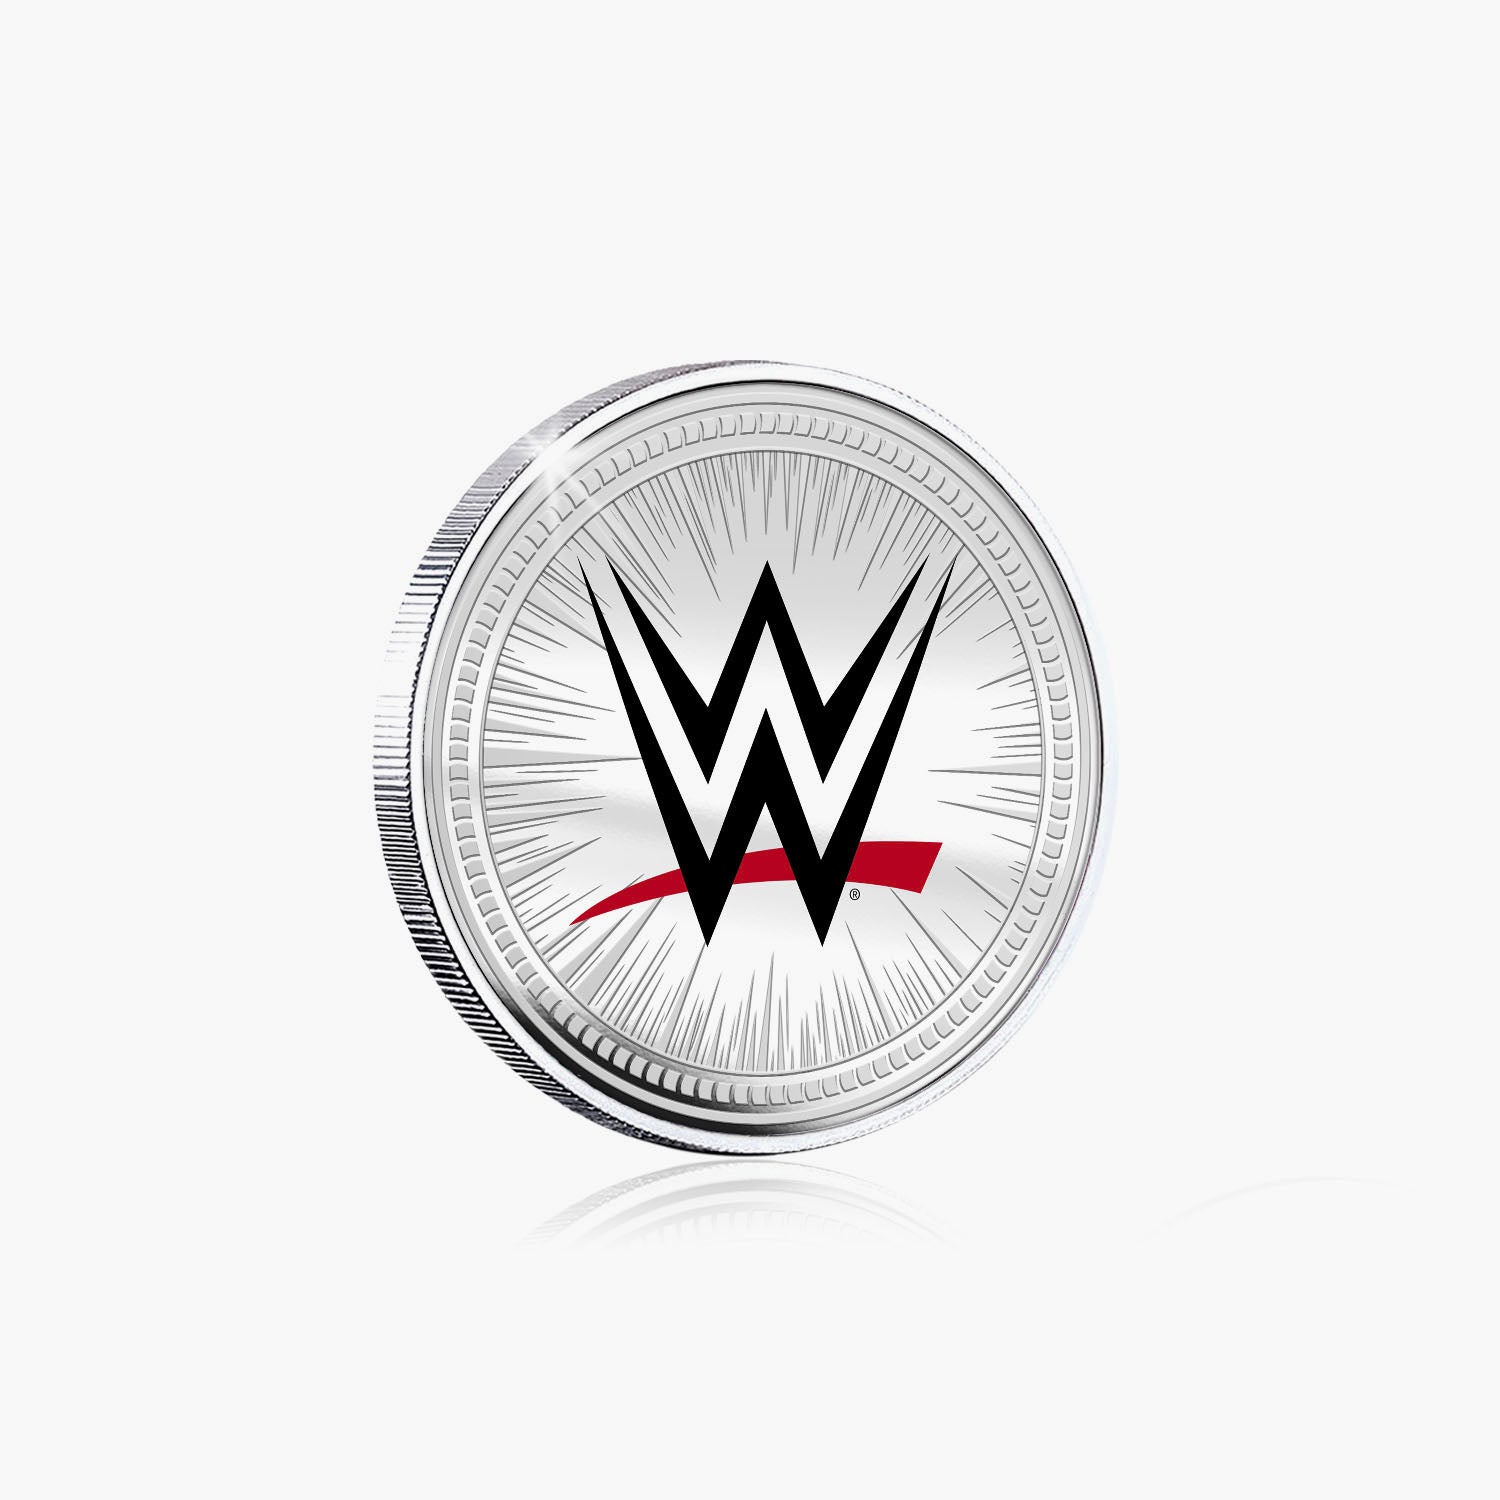 WWE Commemorative Collection - Mr Perfect - 32mm Silver Plated Commemorative